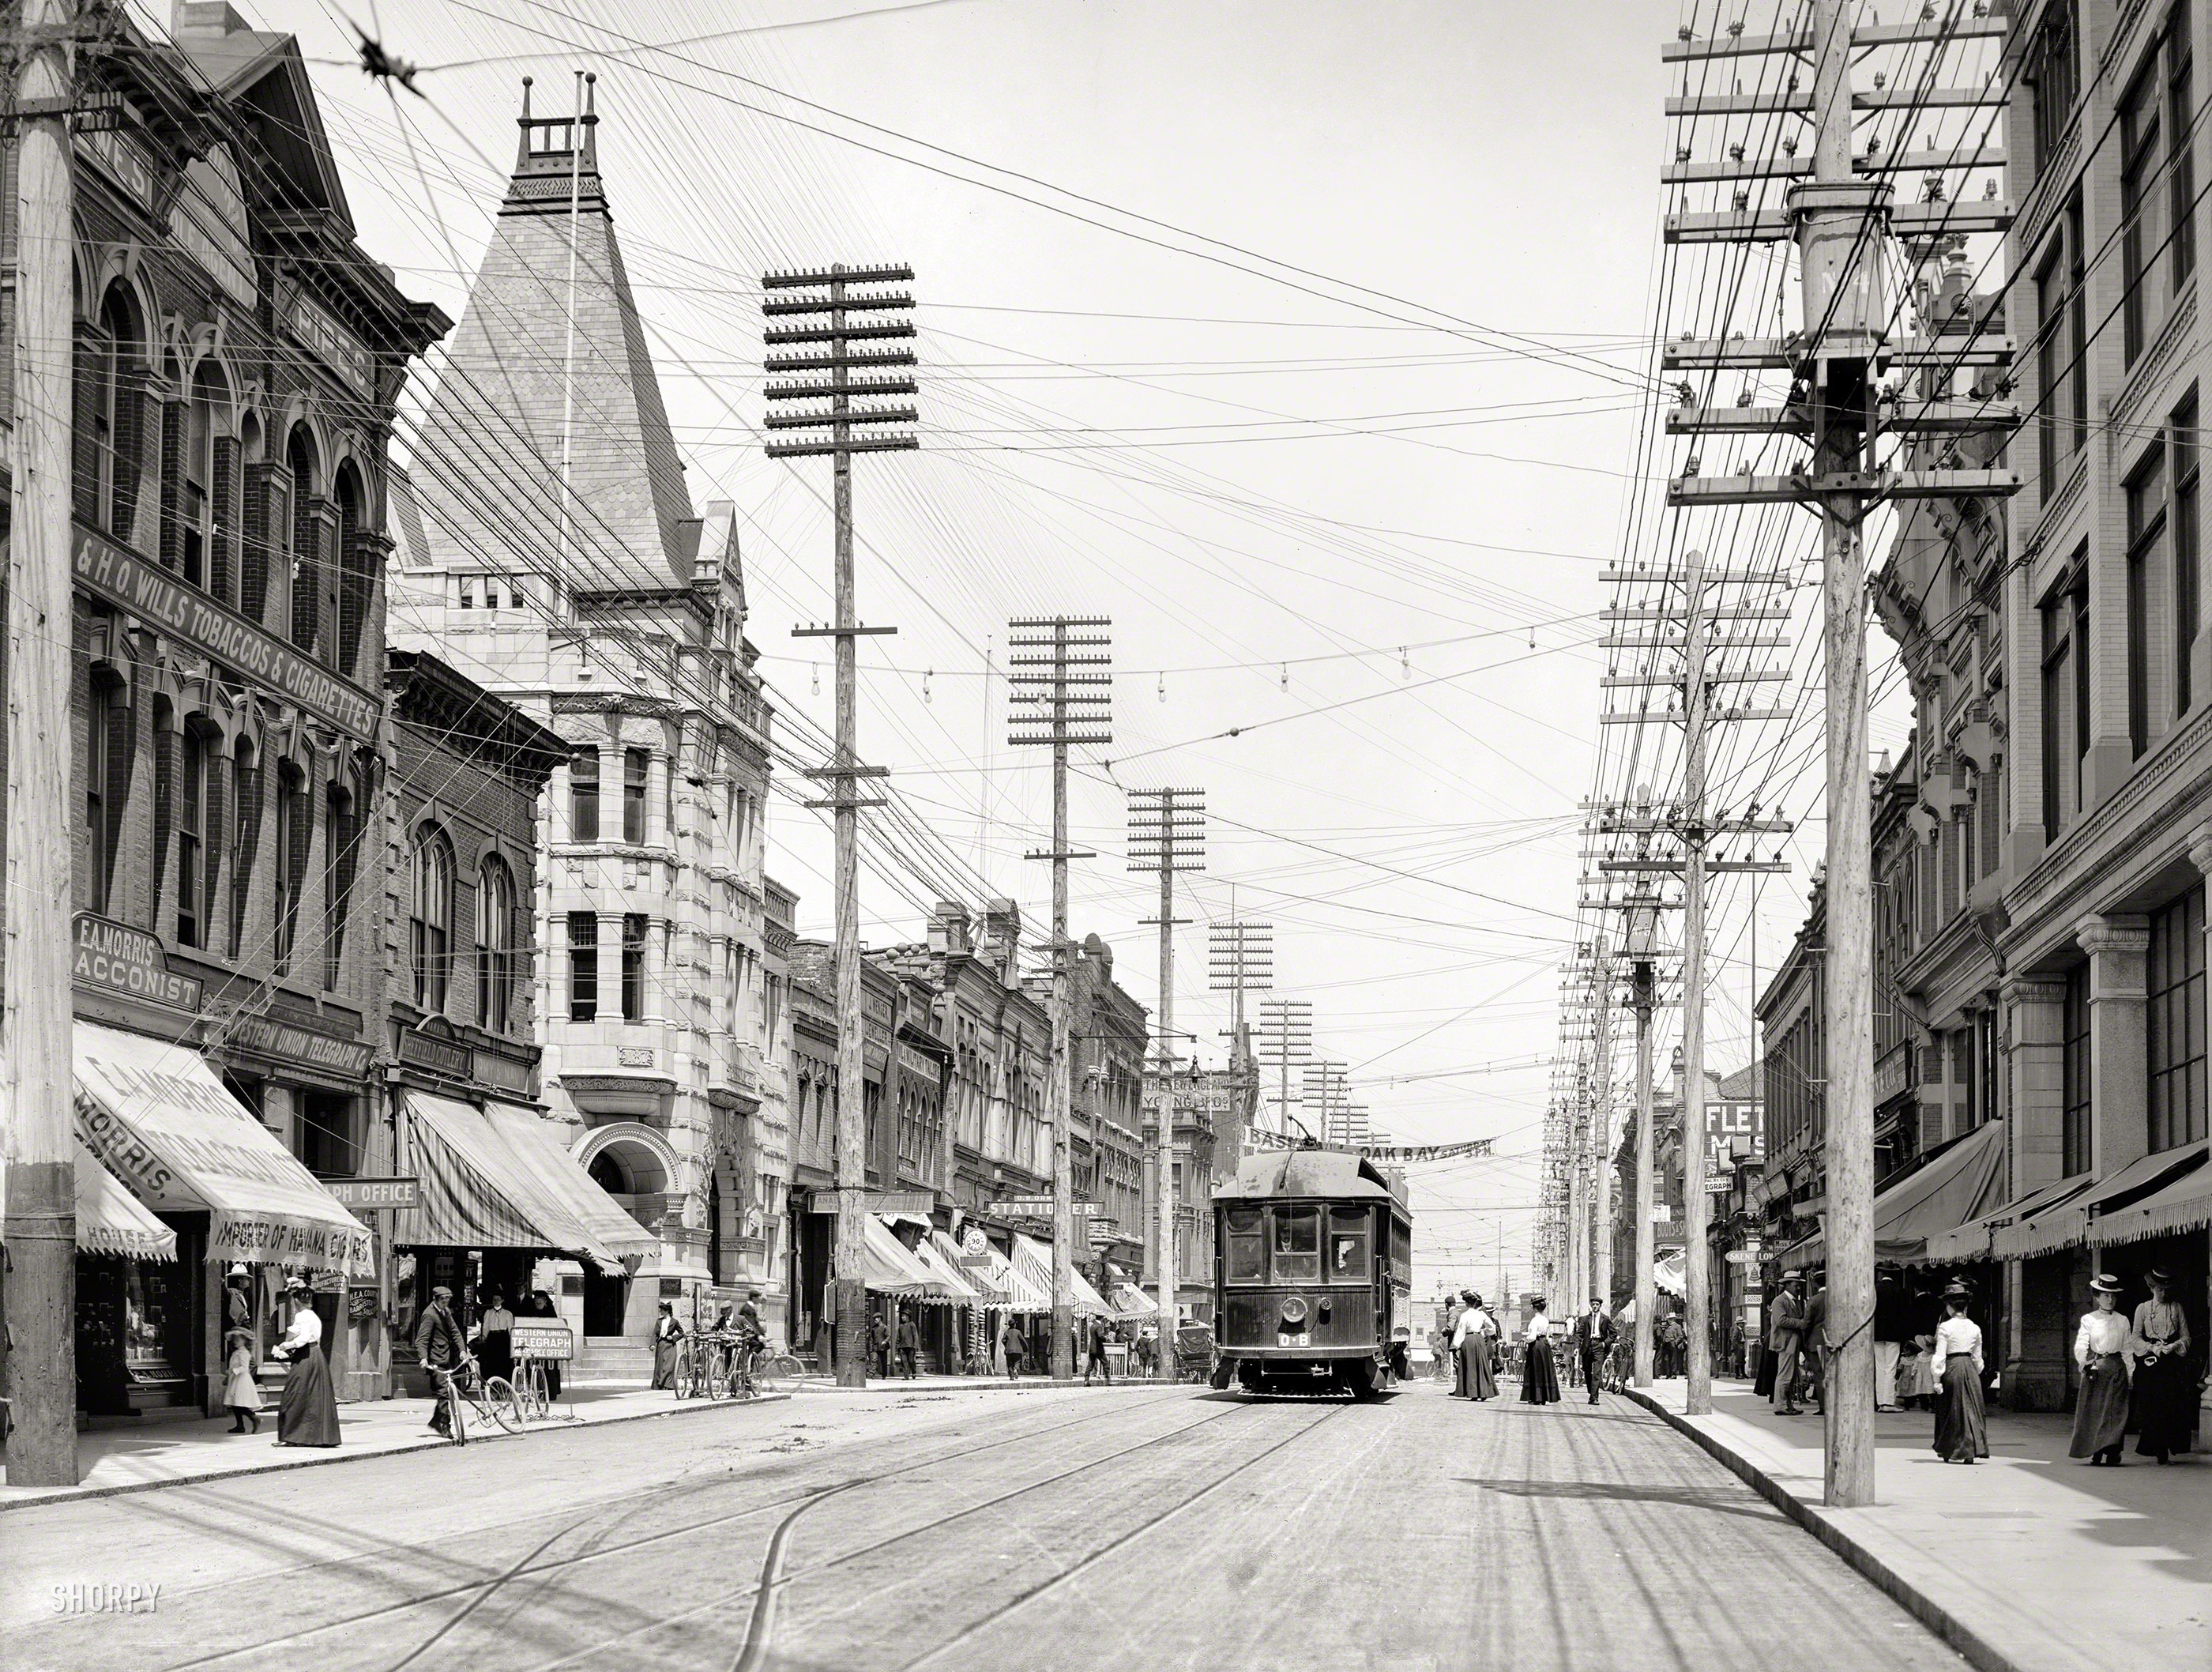 Circa 1903. "Government Street -- Victoria, British Columbia." 8x10 inch dry plate glass negative, Detroit Publishing Company. View full size.